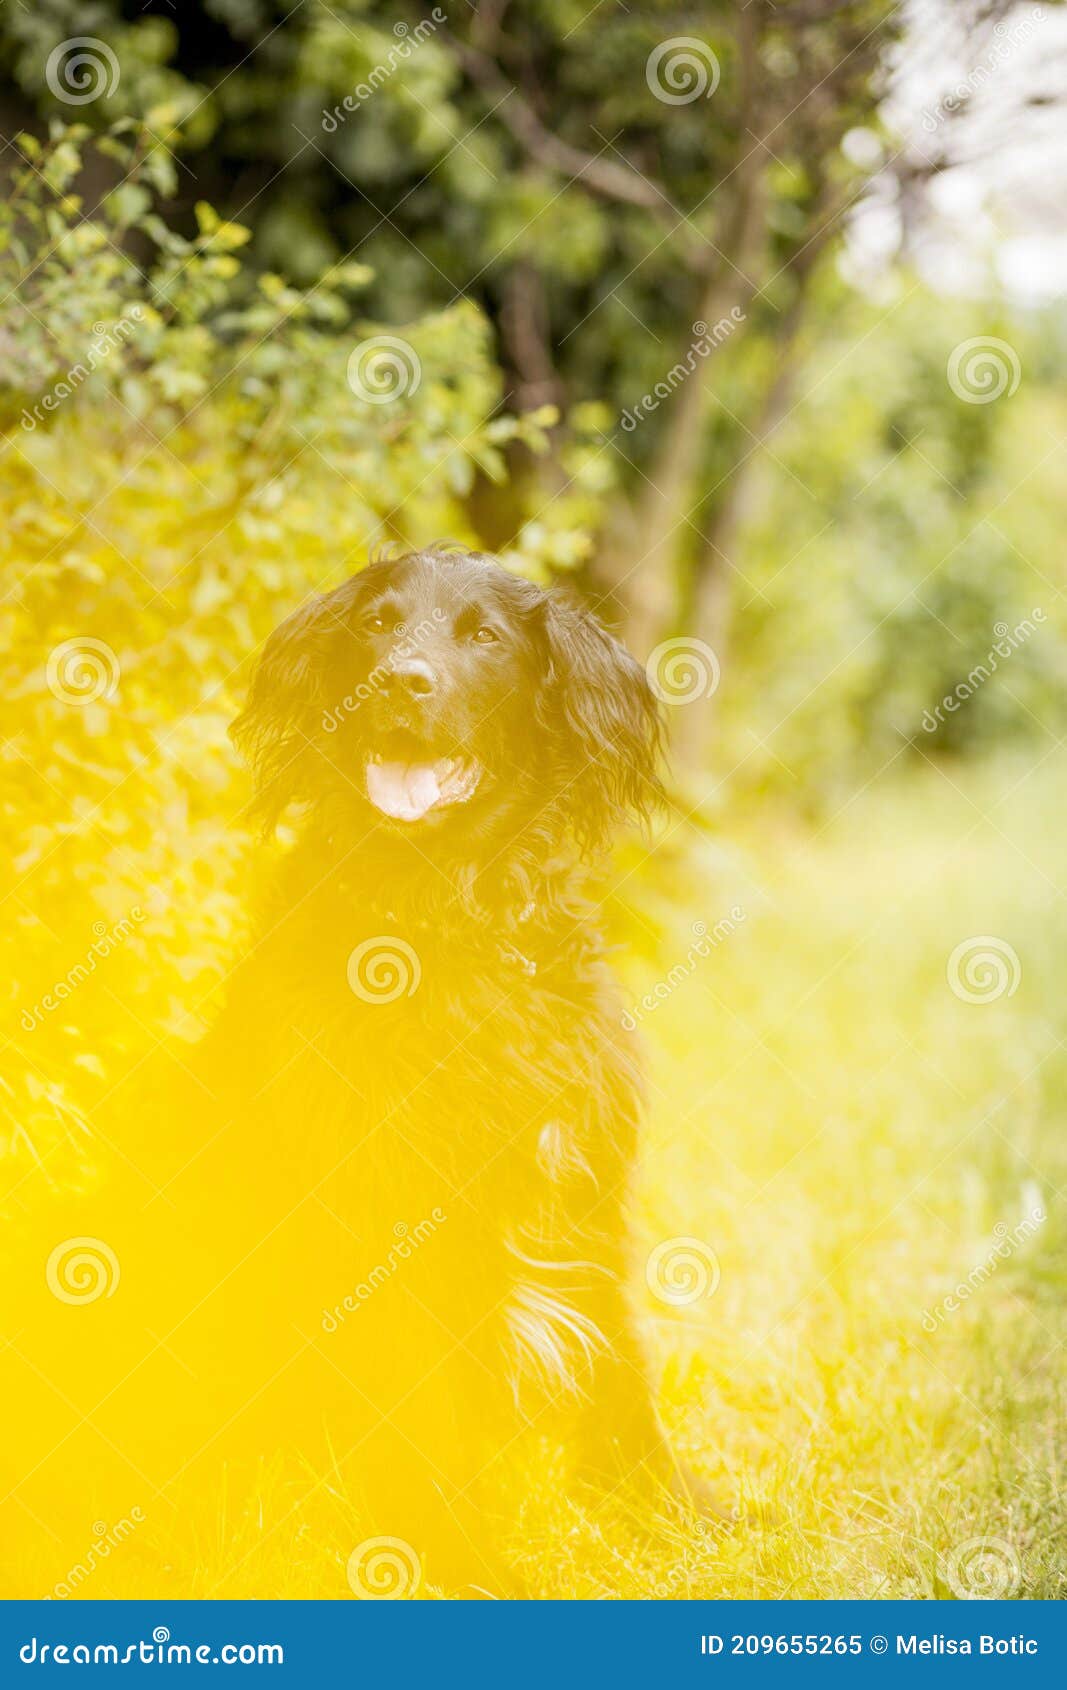 black flat coated retriever sitting in the grass